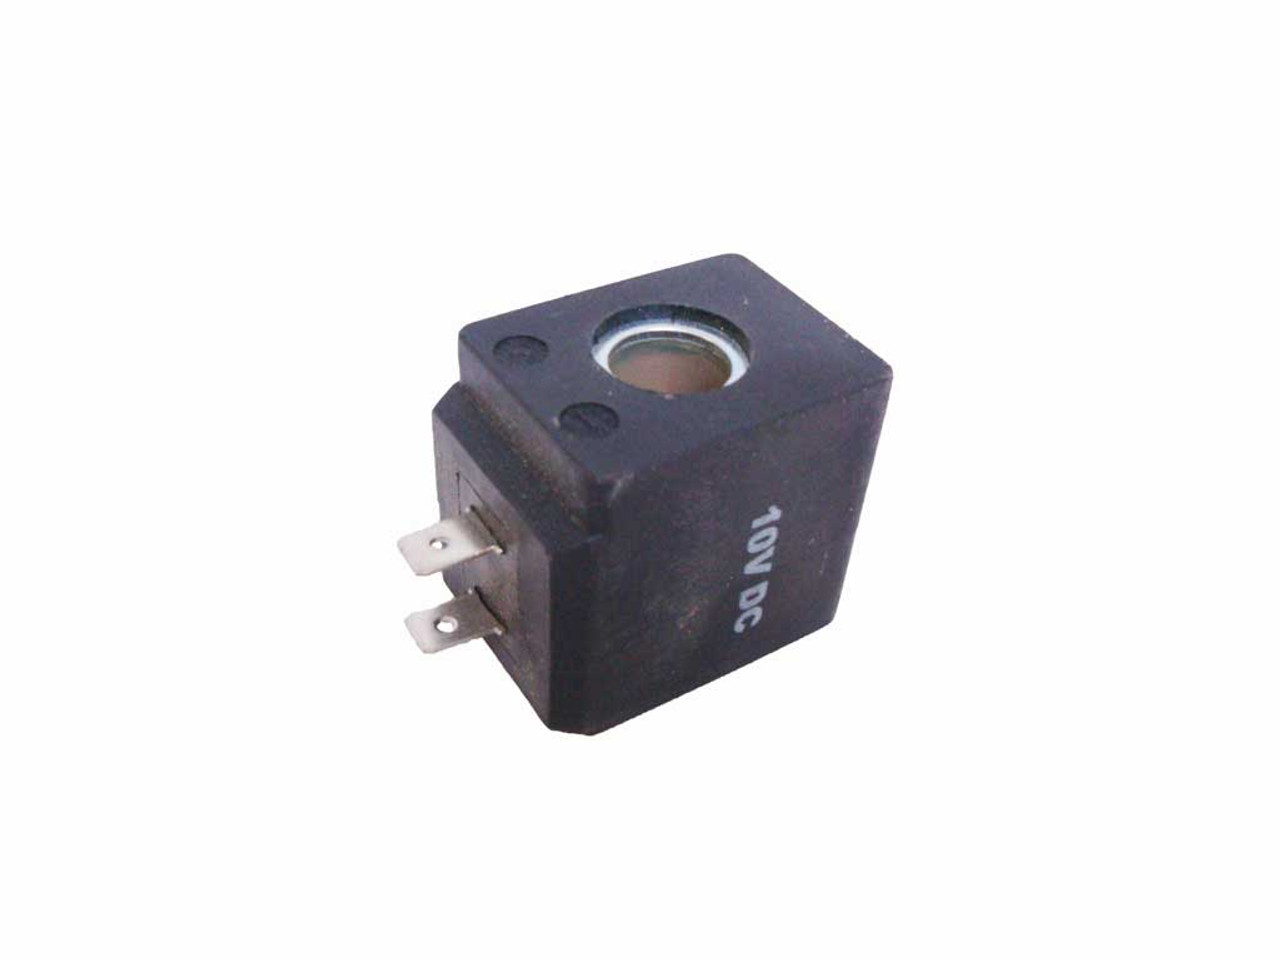 KTI 10 Volt Coil for Use on Power Down Valve on Hydraulic Pumps